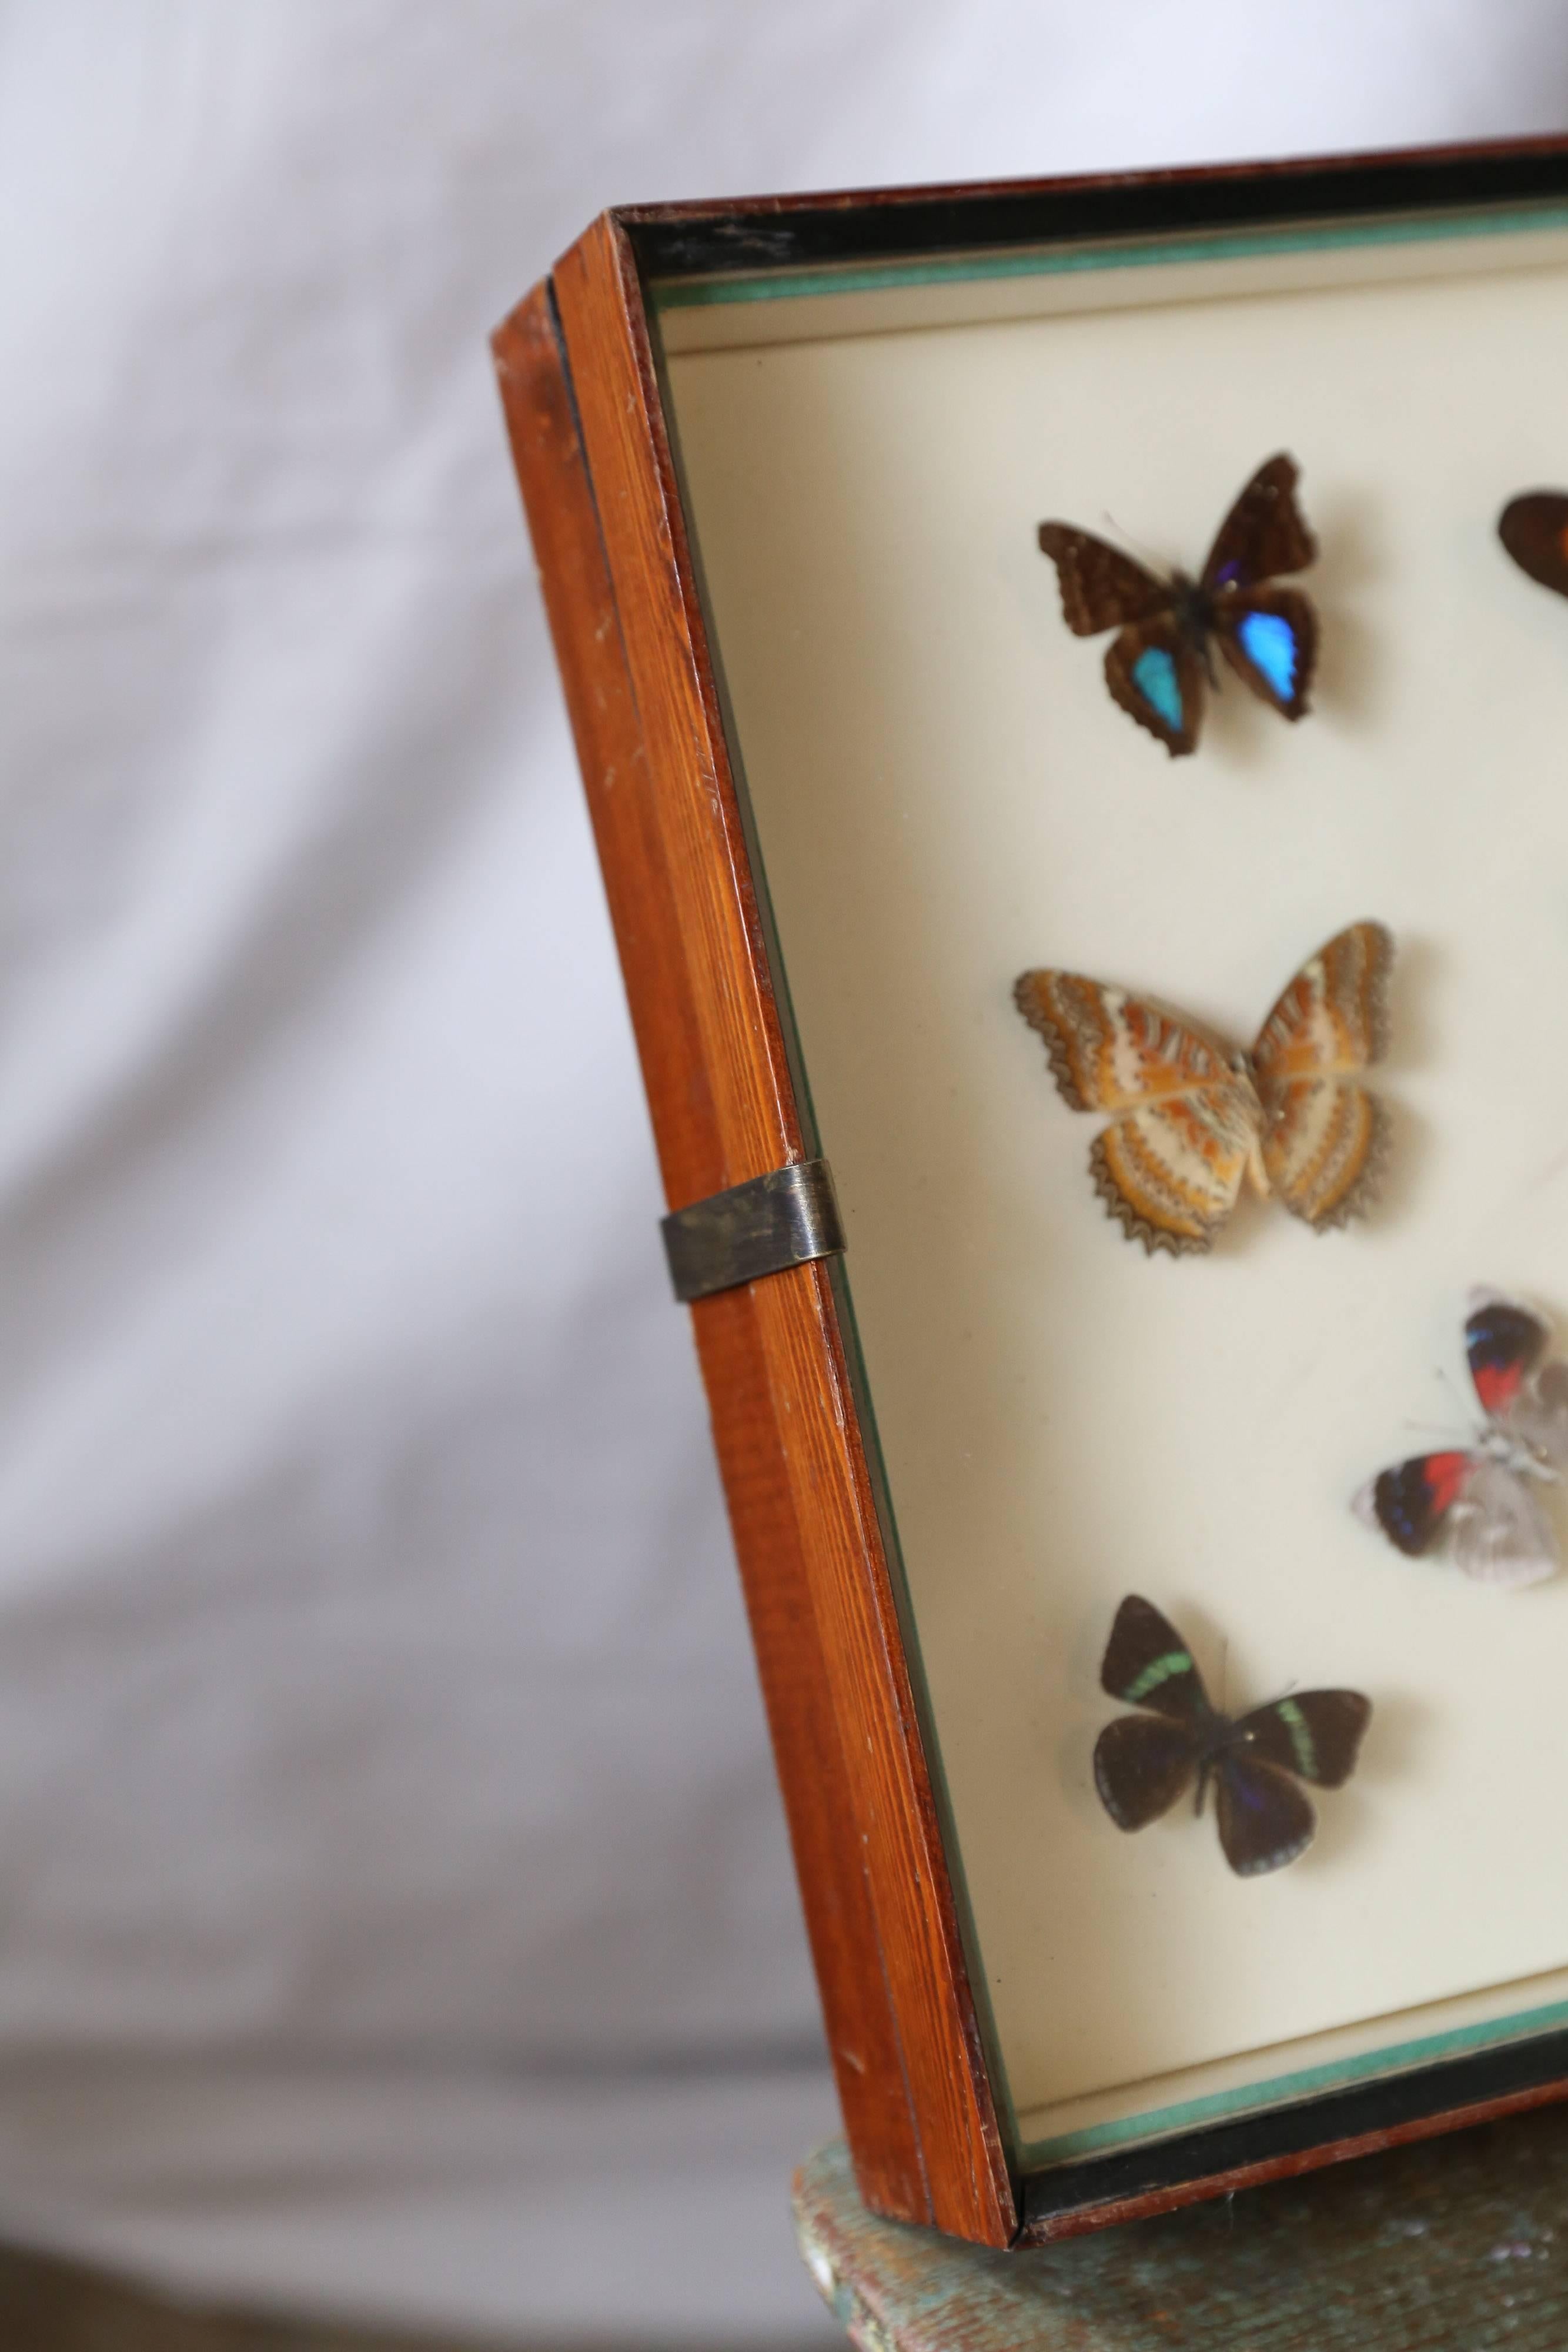 Vintage butterfly specimen collection in glass display box with custom-made hanging bracket.